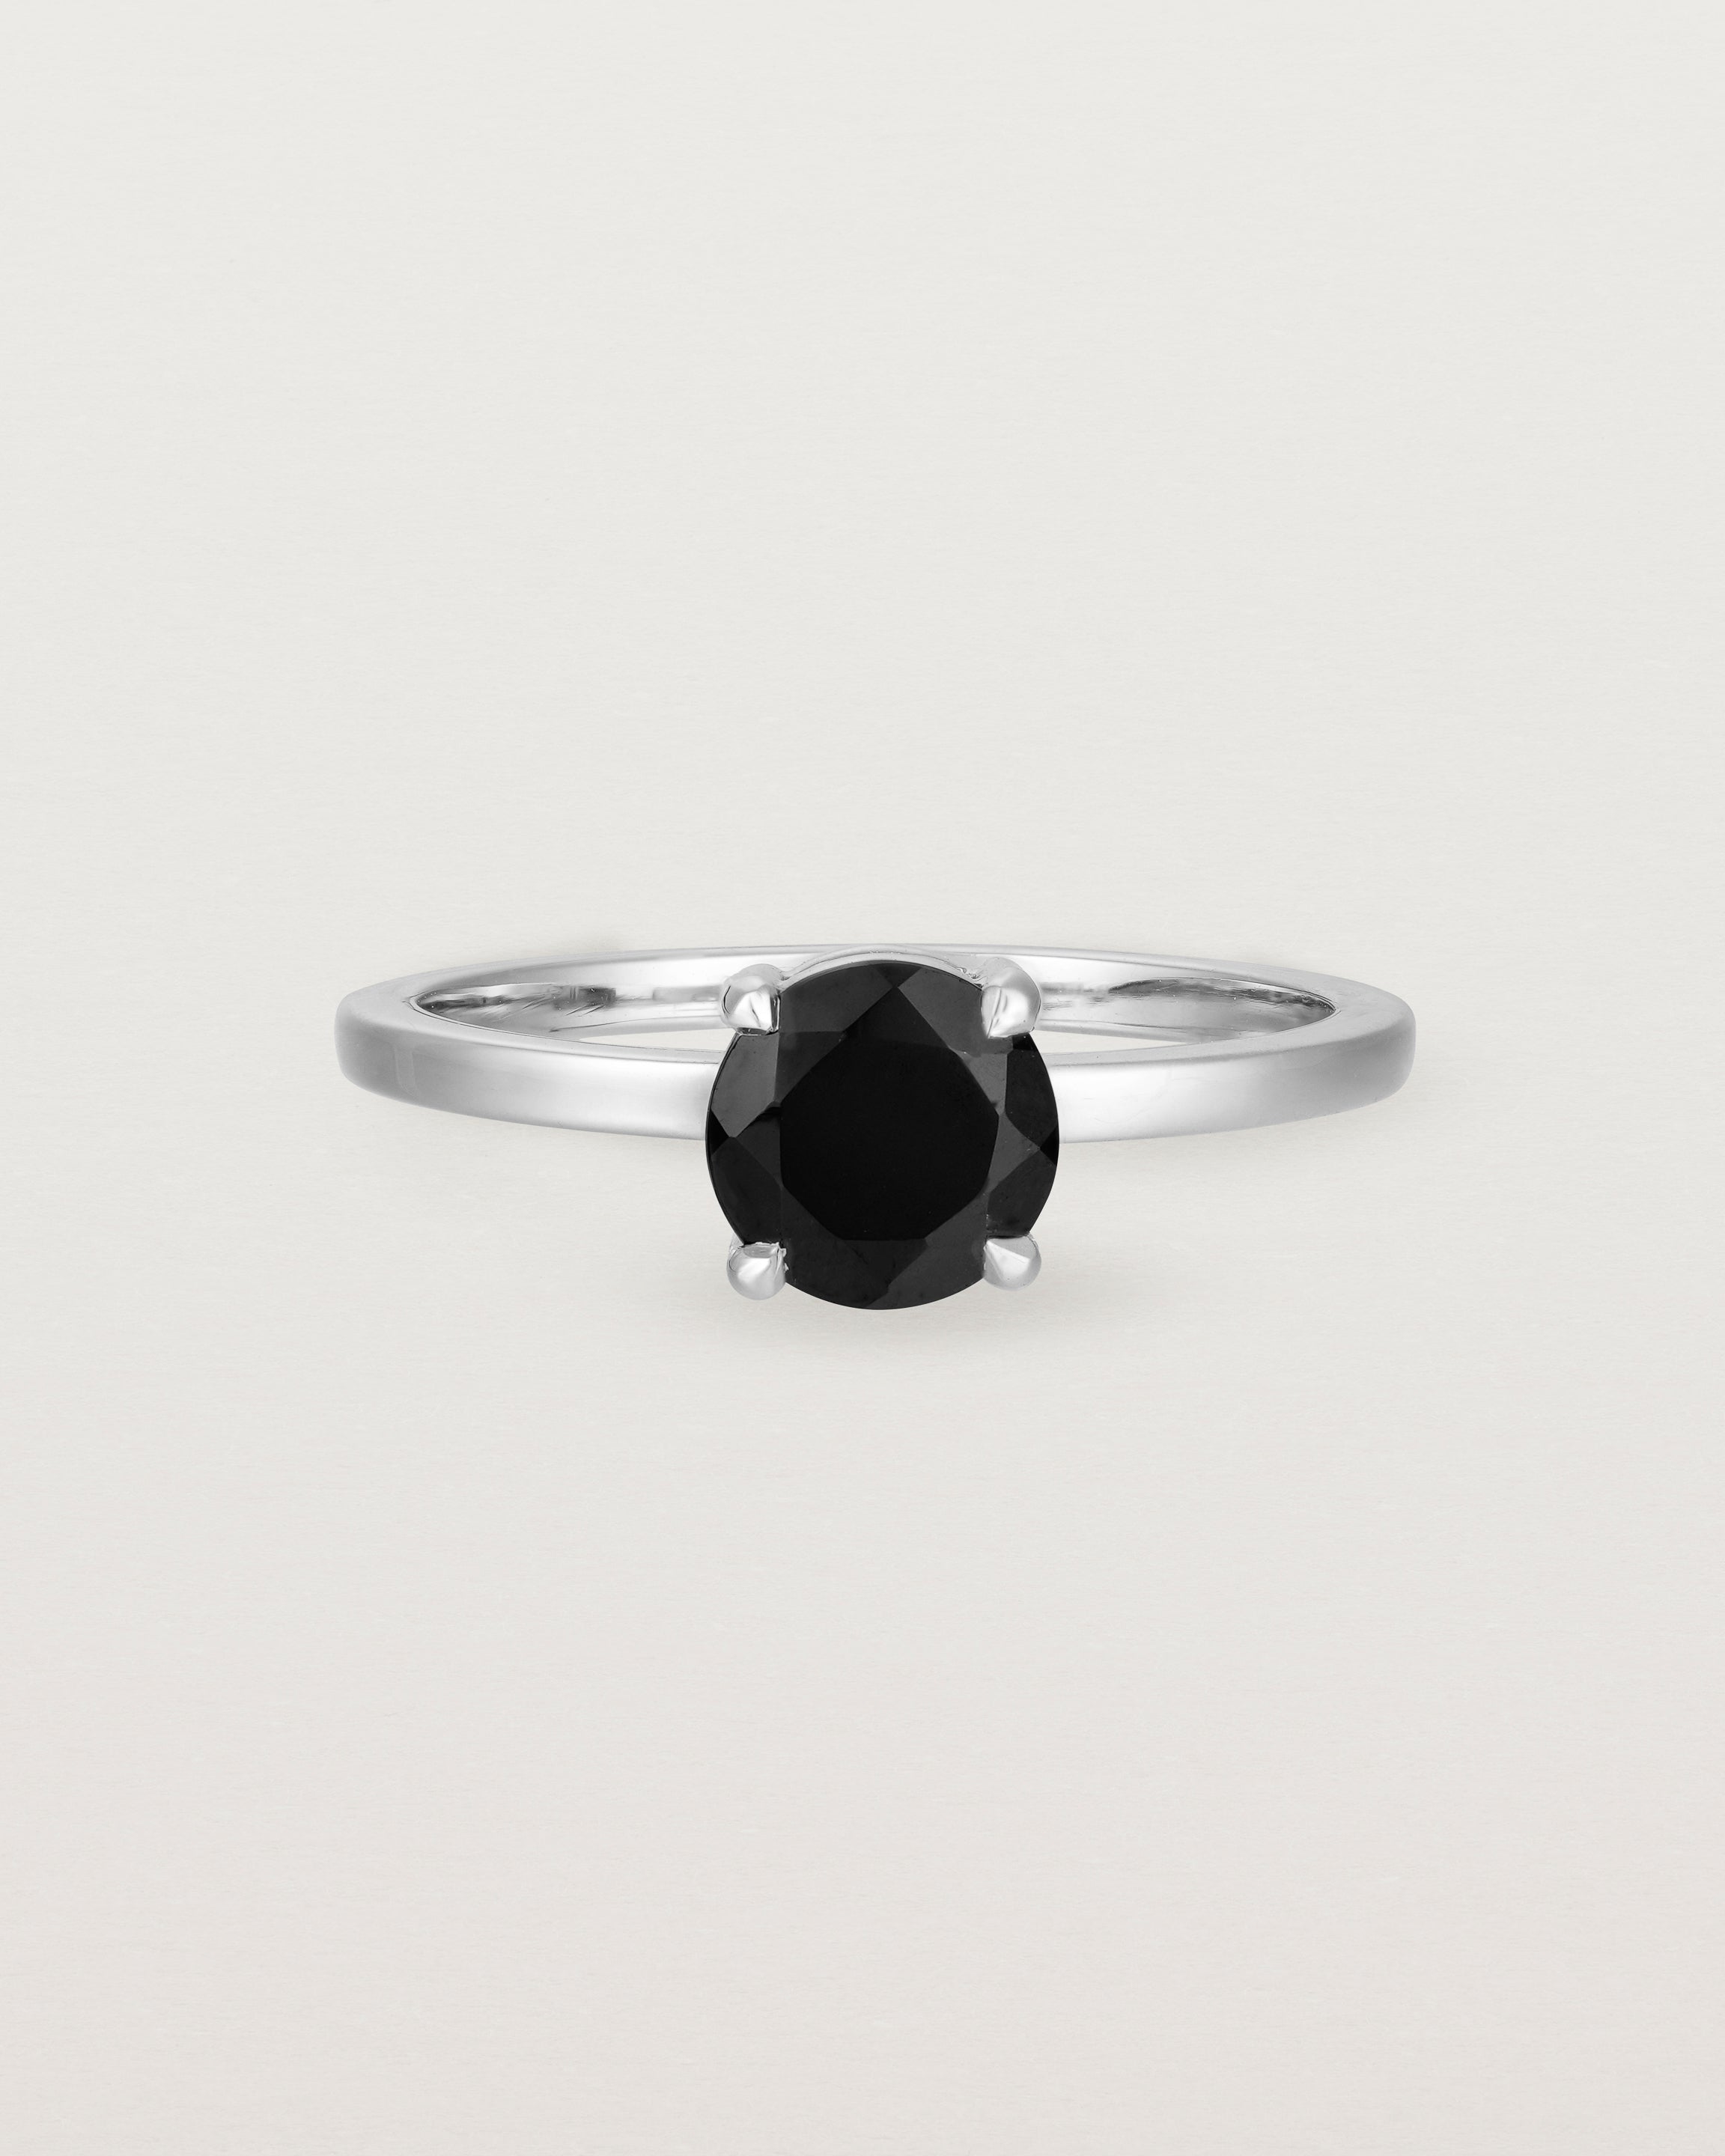 Front view of the Petite Una Round Solitaire | Black Spinel | White Gold.